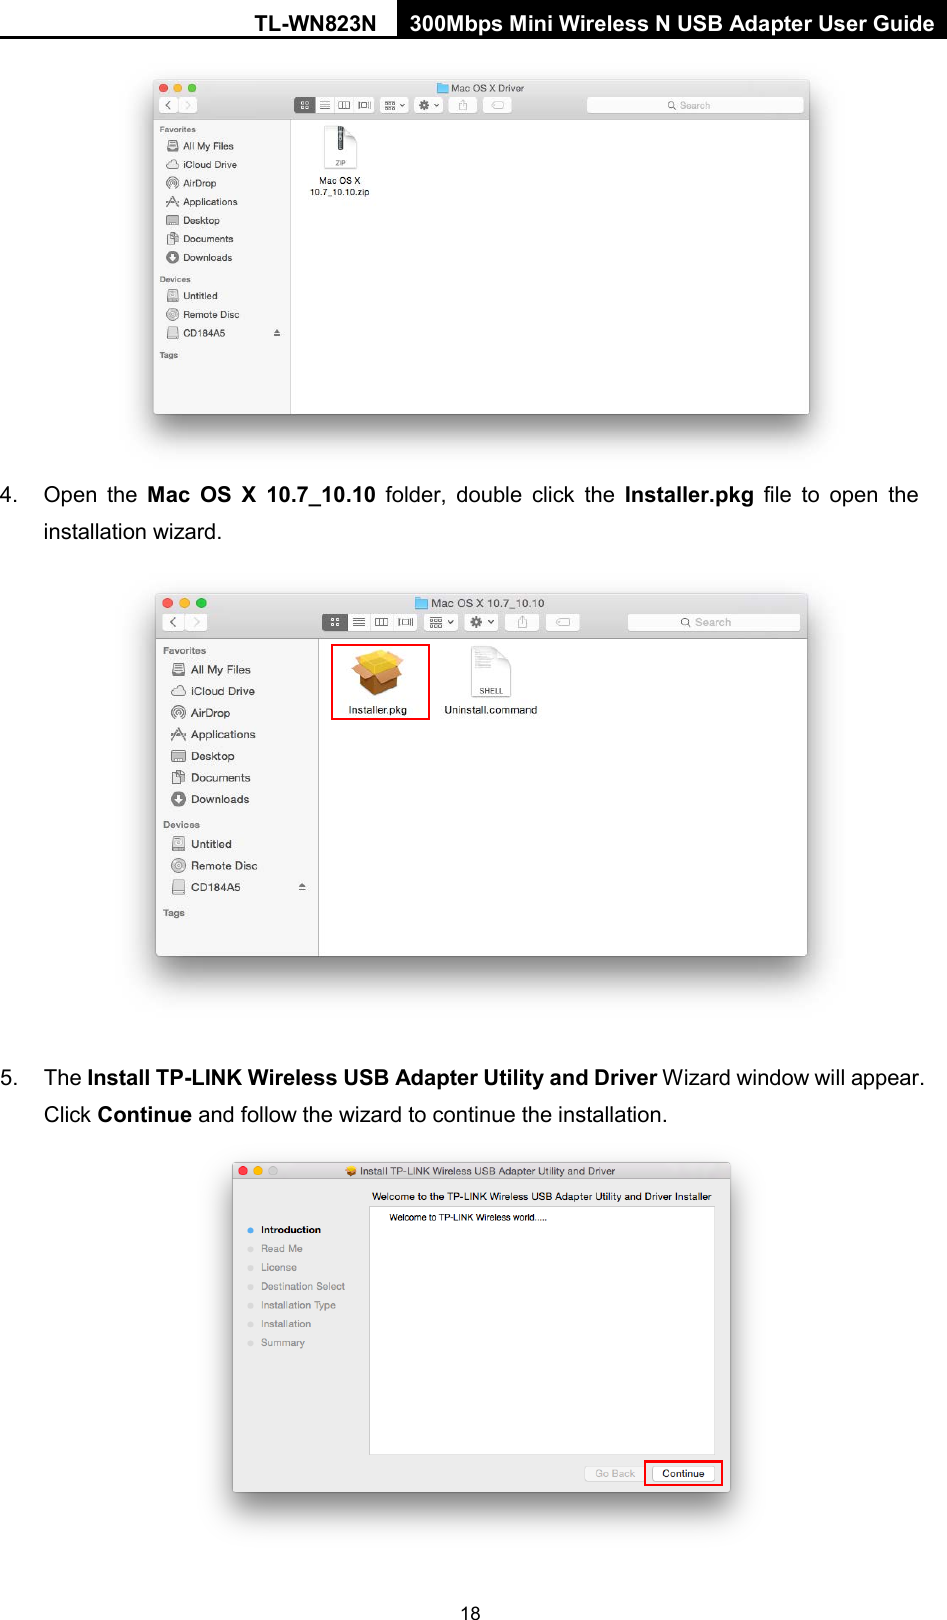 TL-WN823N 300Mbps Mini Wireless N USB Adapter User Guide  18   4. Open the Mac OS X 10.7_10.10 folder, double click the Installer.pkg file to open the installation wizard.   5. The Install TP-LINK Wireless USB Adapter Utility and Driver Wizard window will appear. Click Continue and follow the wizard to continue the installation.  